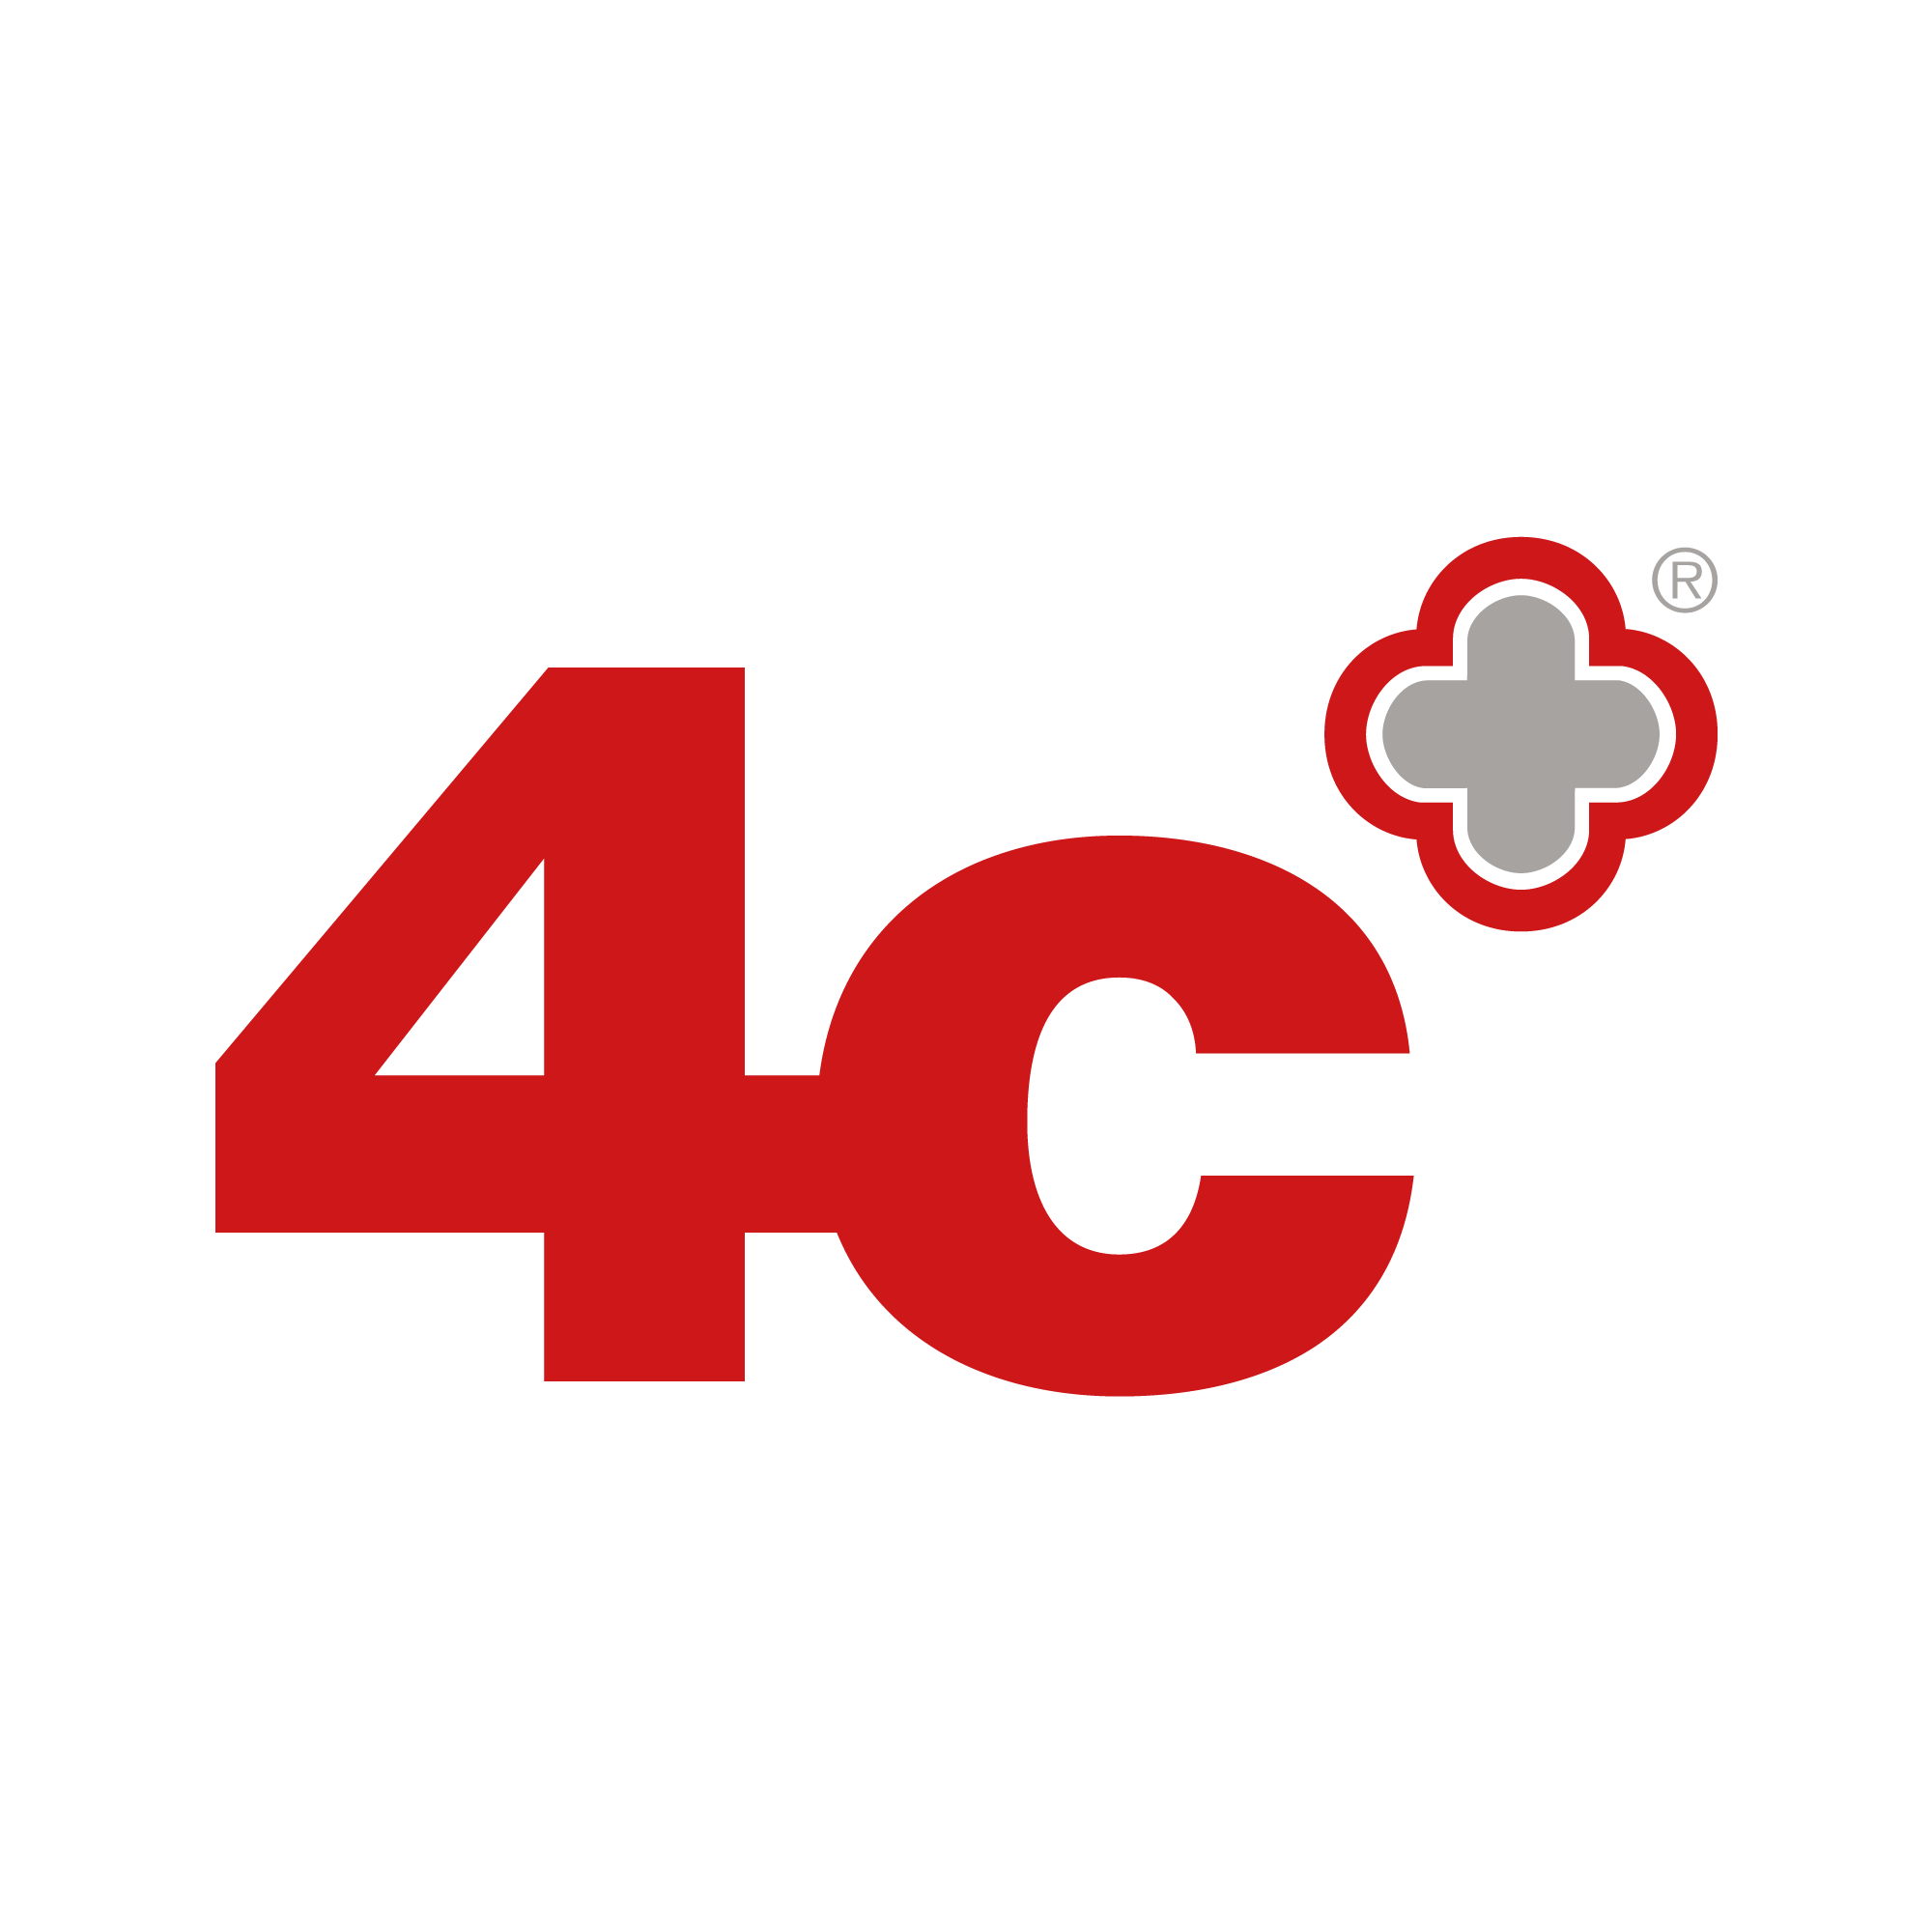 Linked logo for 4c Engineering